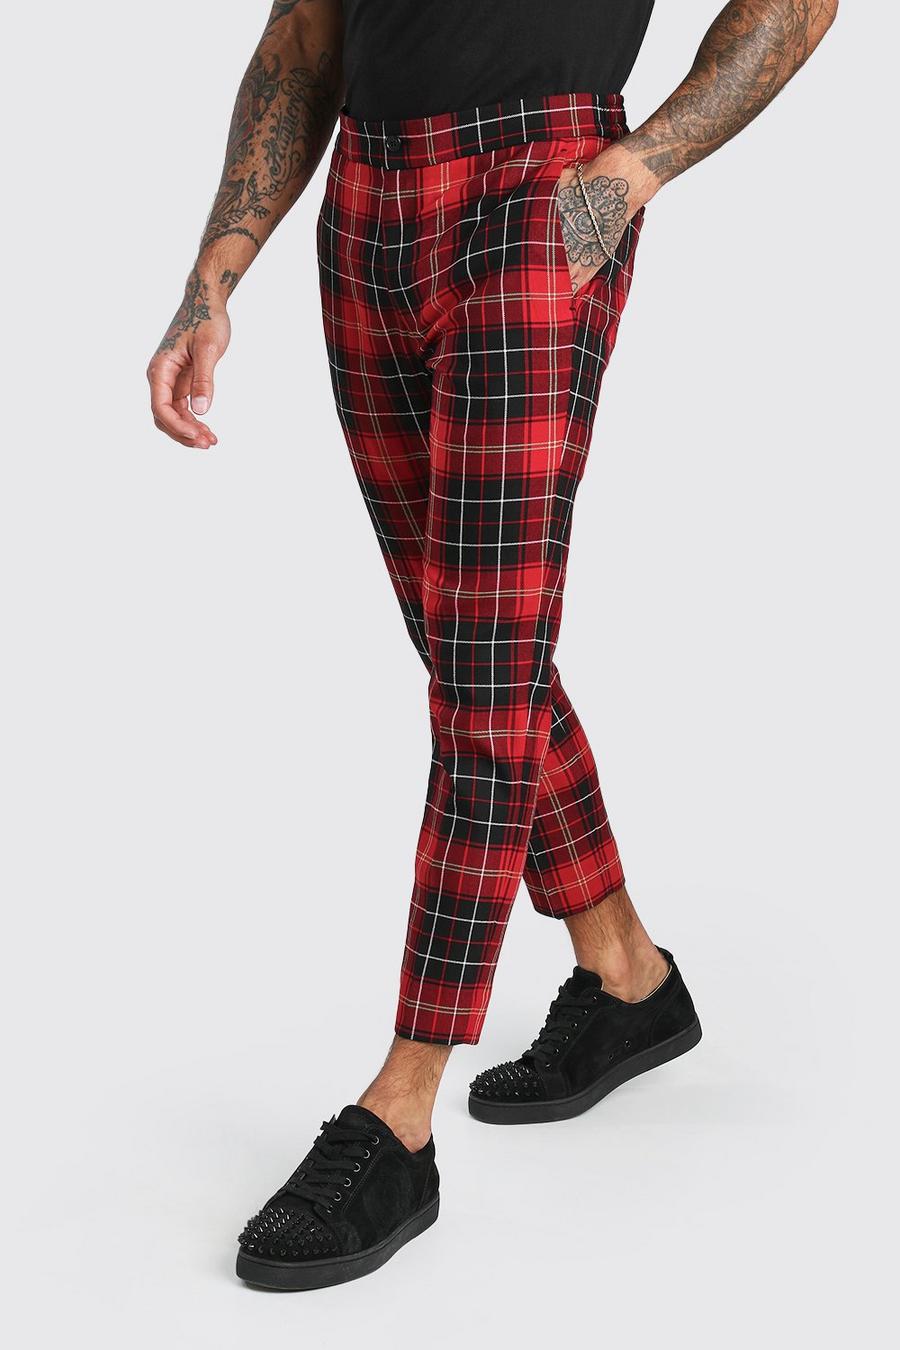 Skinny Red Plaid Cropped Smart Pants